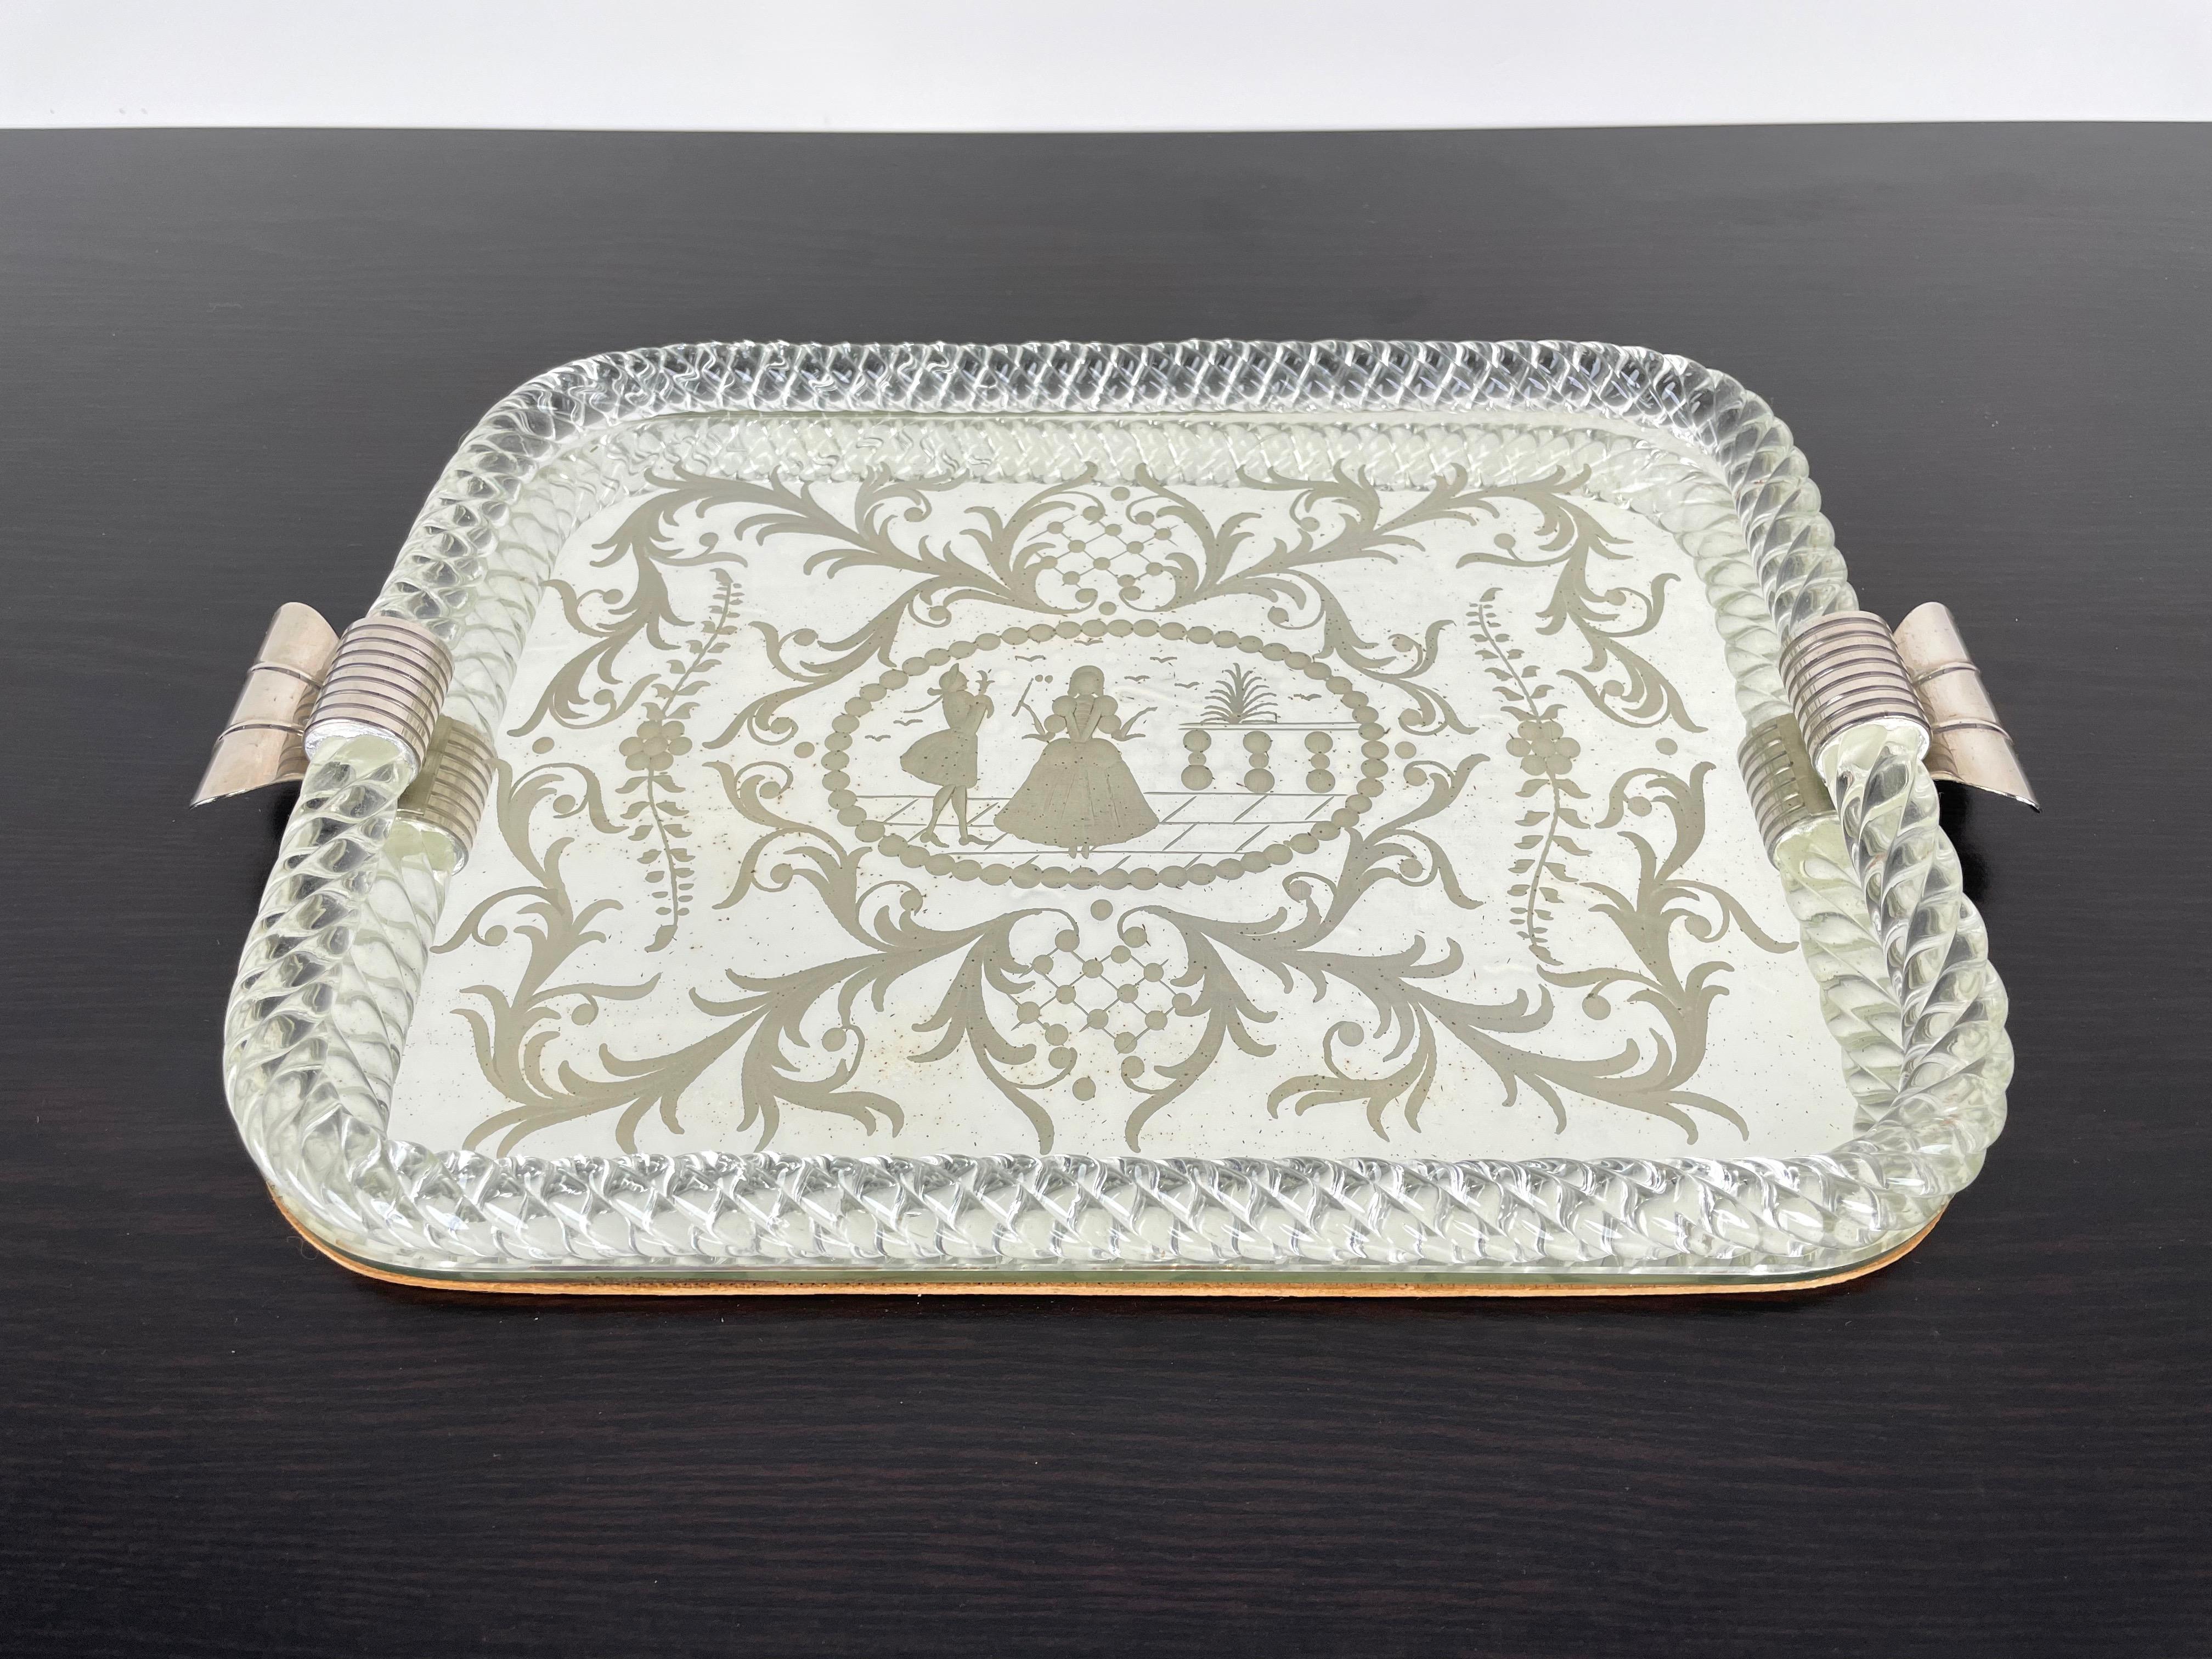 Rectangular mirror-engraved Murano glass serving tray. This wonderful piece was produced in Italy during 1940s by the master Murano glass-maker Ercole Barovier. This wonderful item is a peculiar Venetian vintage tray with a mirror base and silver